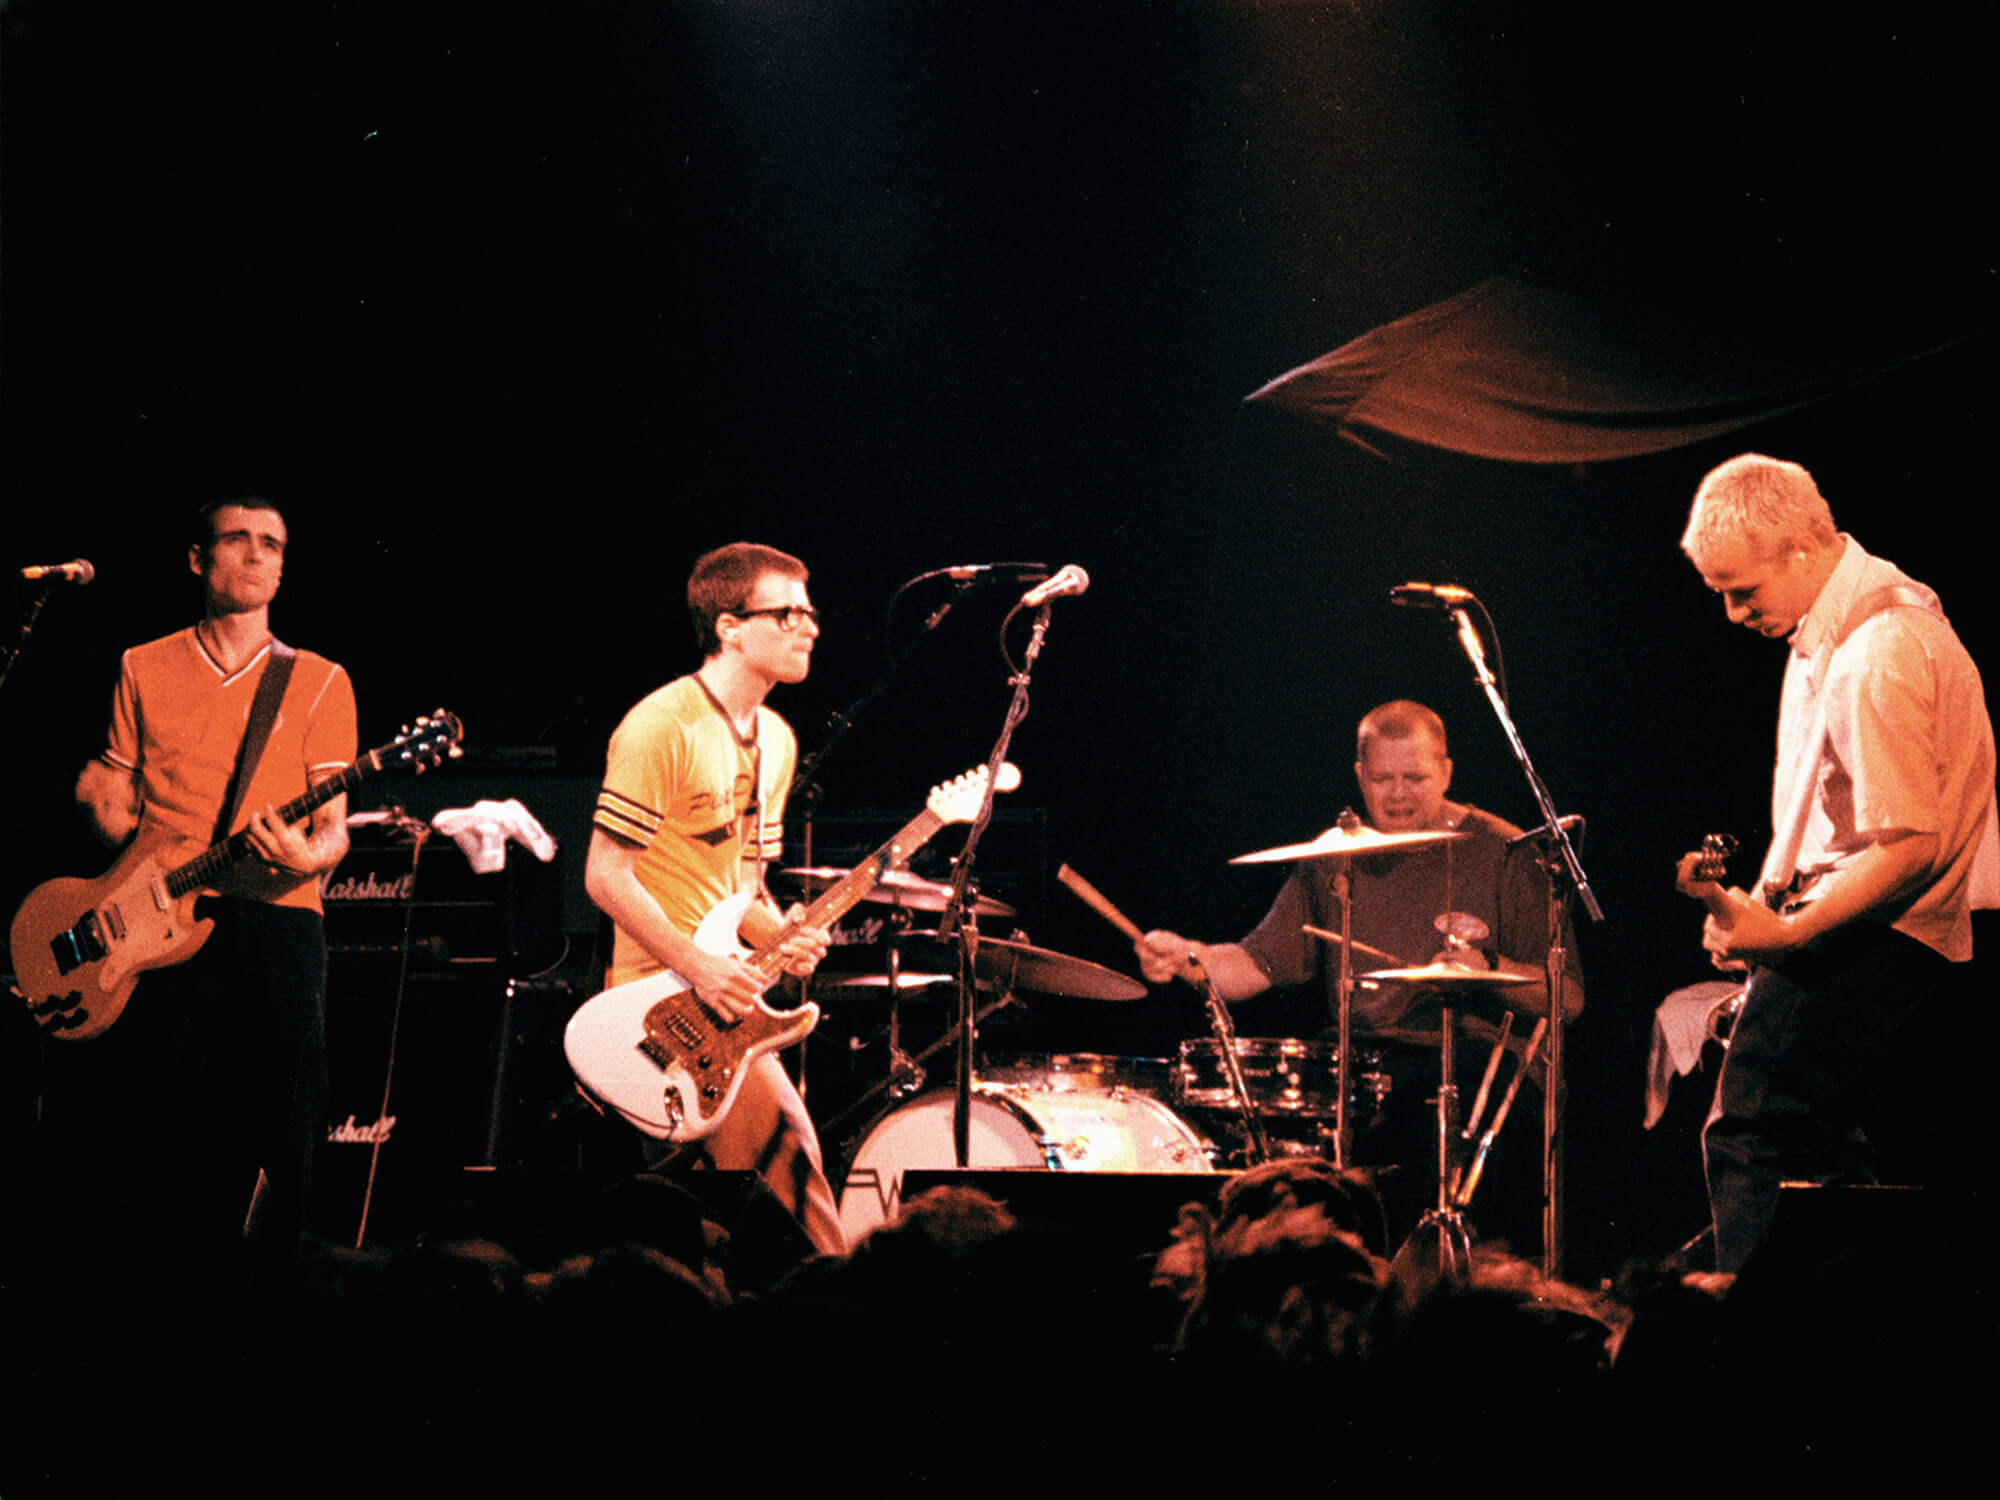 Weezer performing in 1995, photo by Jim Steinfeldt/Michael Ochs Archives via Getty Images